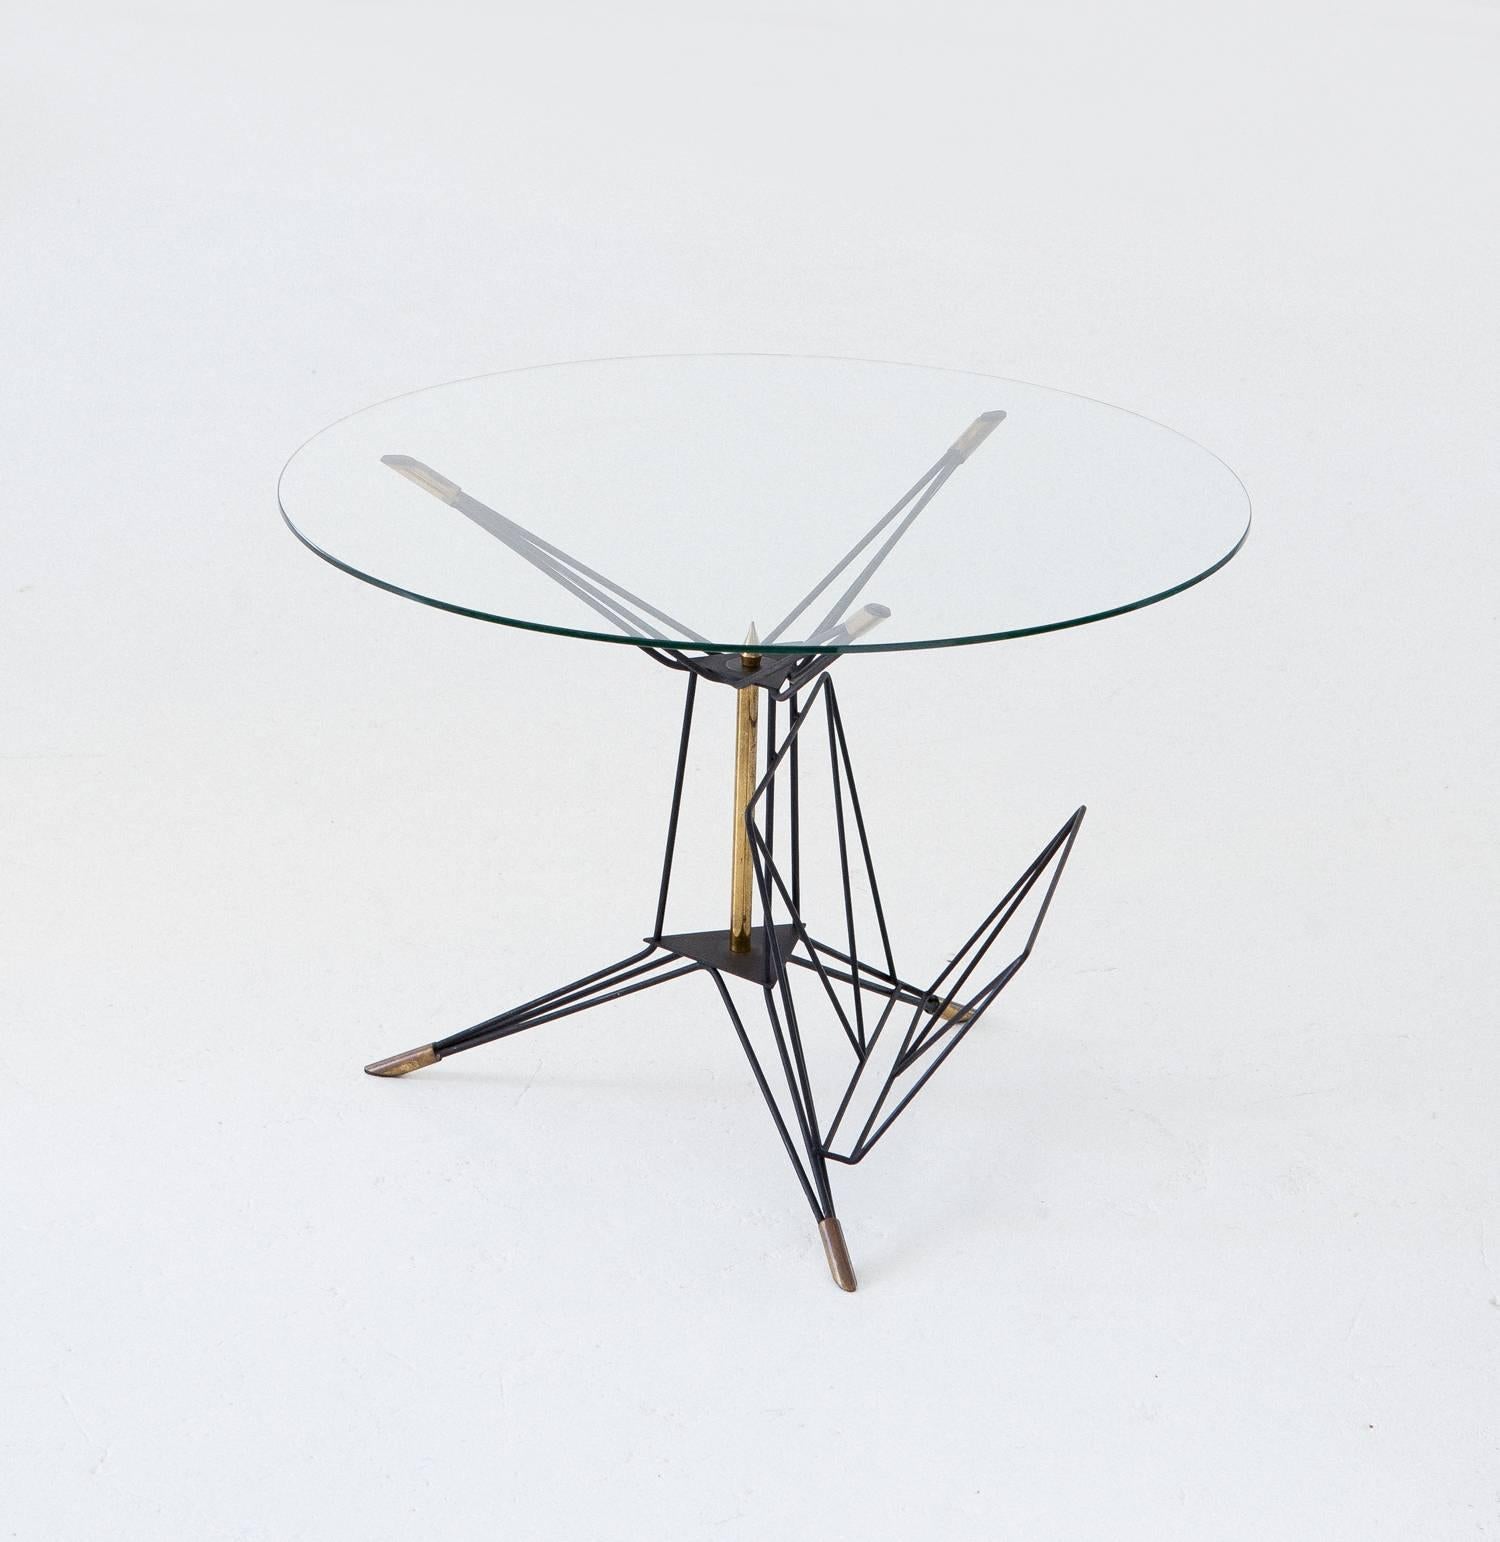 A sculptural and airy Coffee table manufactured in Italy in 1950s
This side table has a geometrical black enameled iron and brass frame with glass top and magazine holder
This is a Mid-Century Modern style object.
The object has not been restored